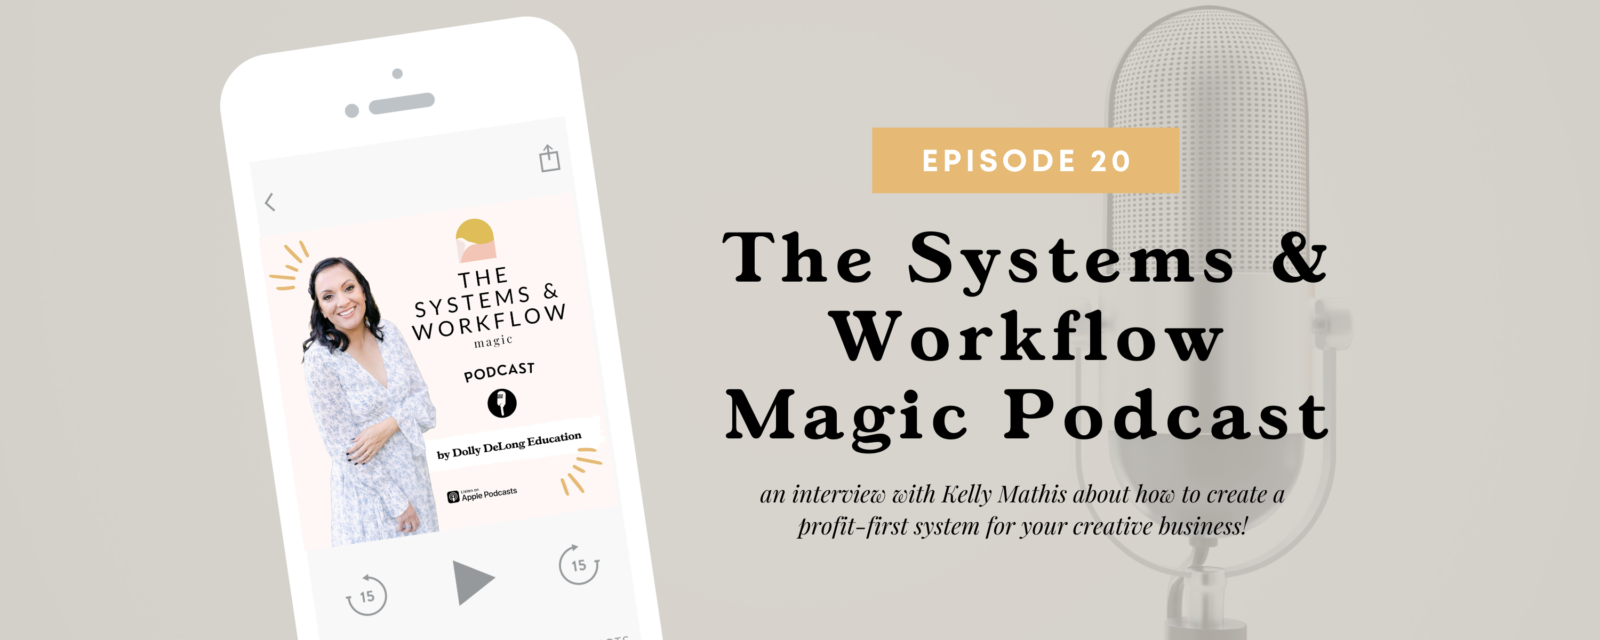 blog_banner_episode_20_The_systems_and_workflow_magic_podcast_featuring_Kelly_mathis